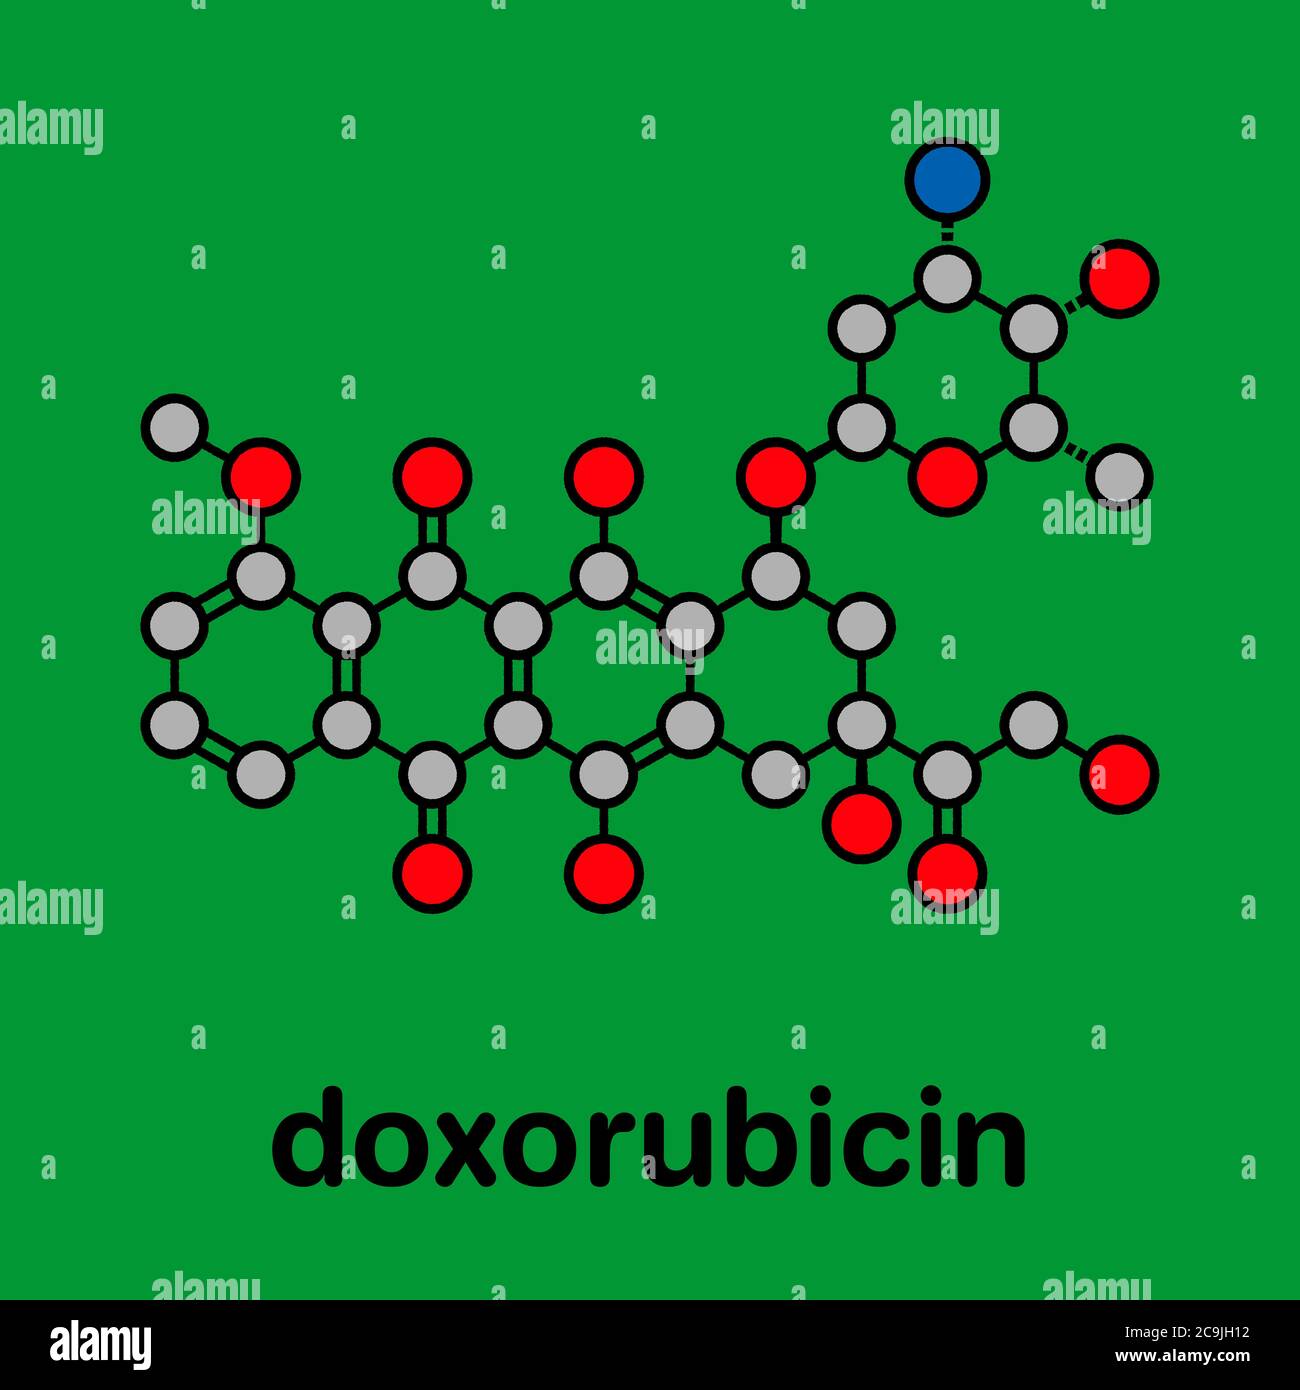 Doxorubicin cancer chemotherapy drug molecule. Stylized skeletal formula (chemical structure). Atoms are shown as color-coded circles with thick black Stock Photo